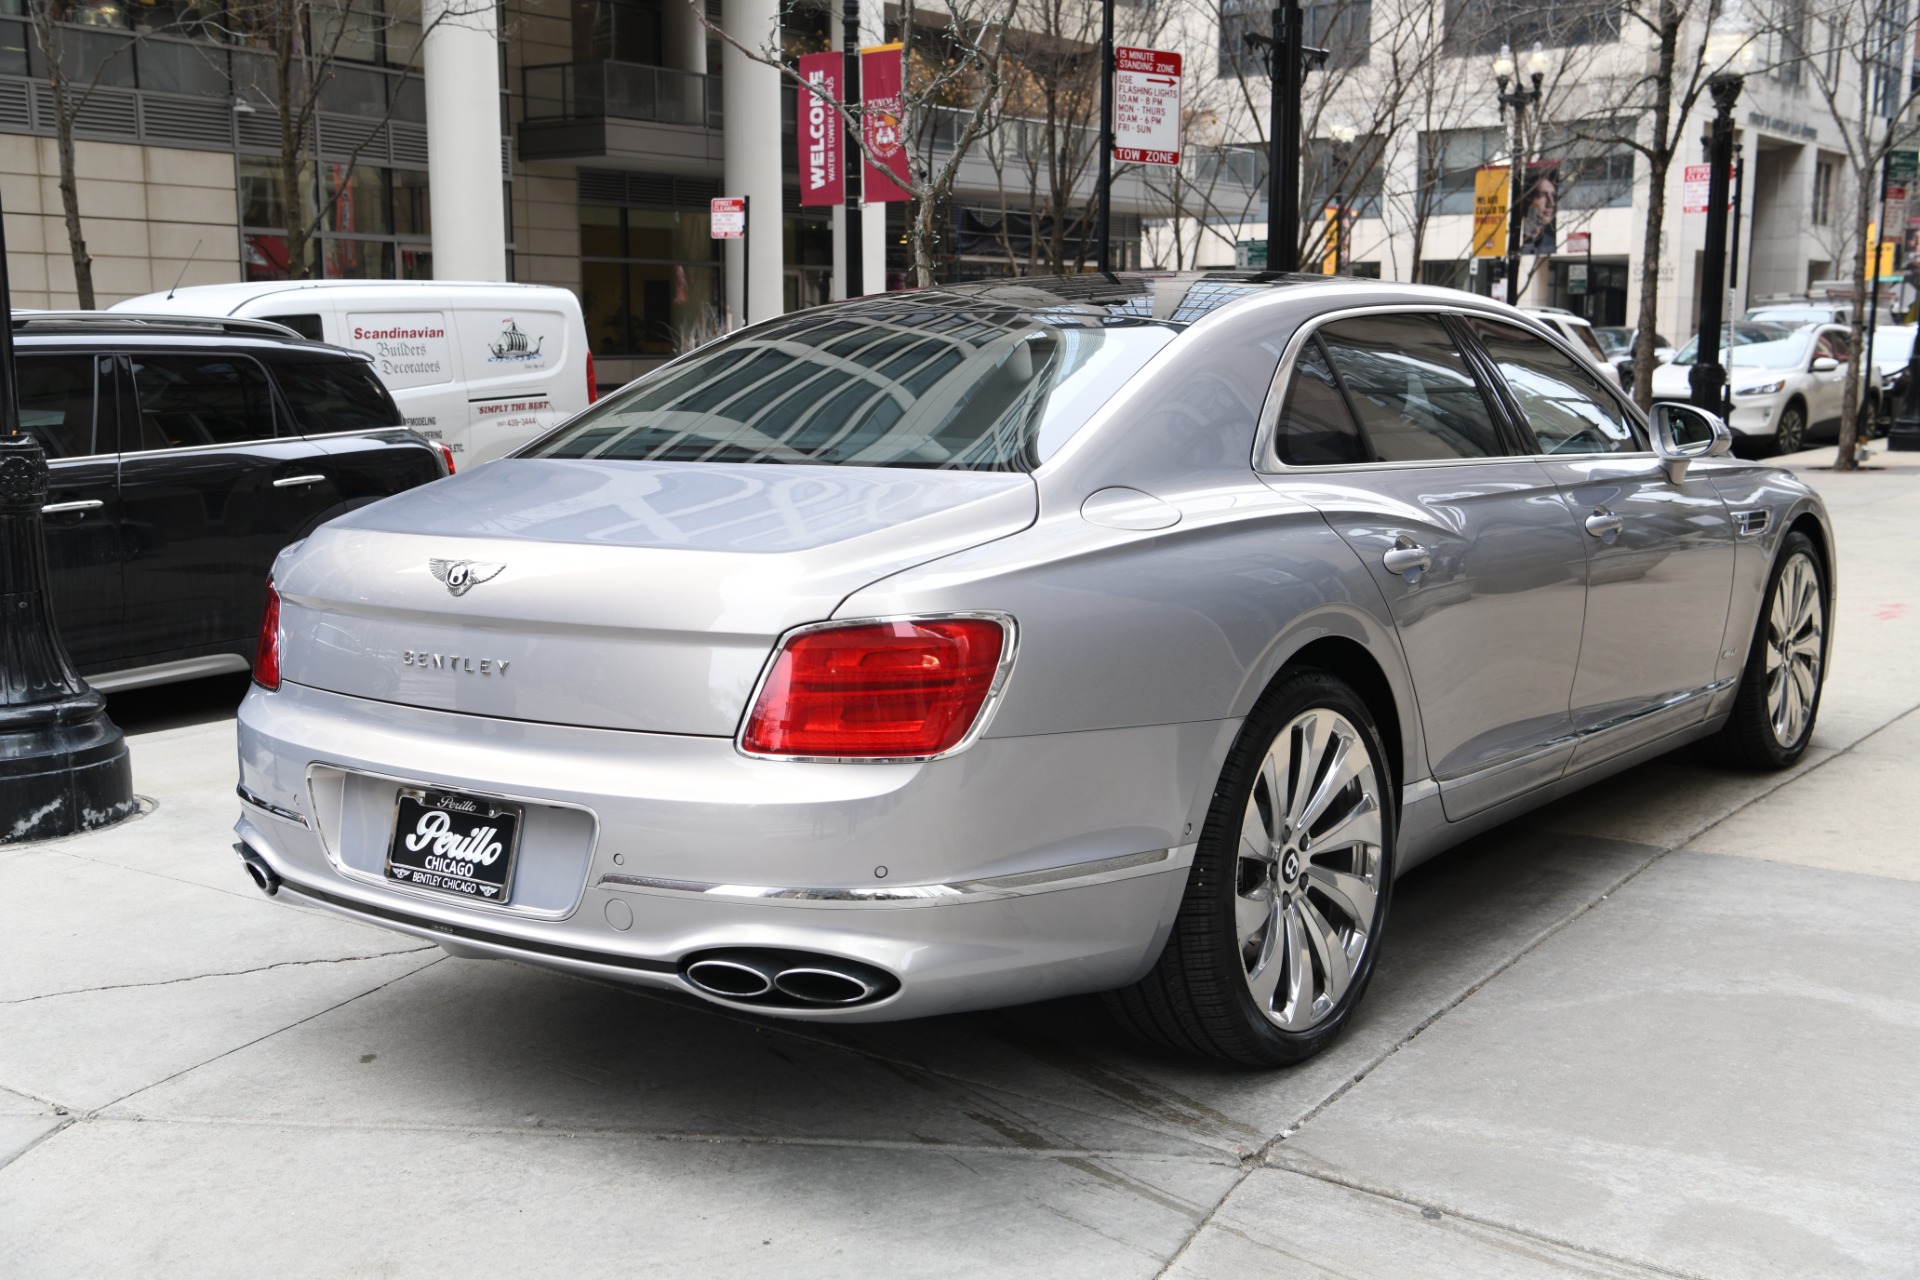 Used 2022 Bentley Flying Spur Hybrid | Chicago, IL